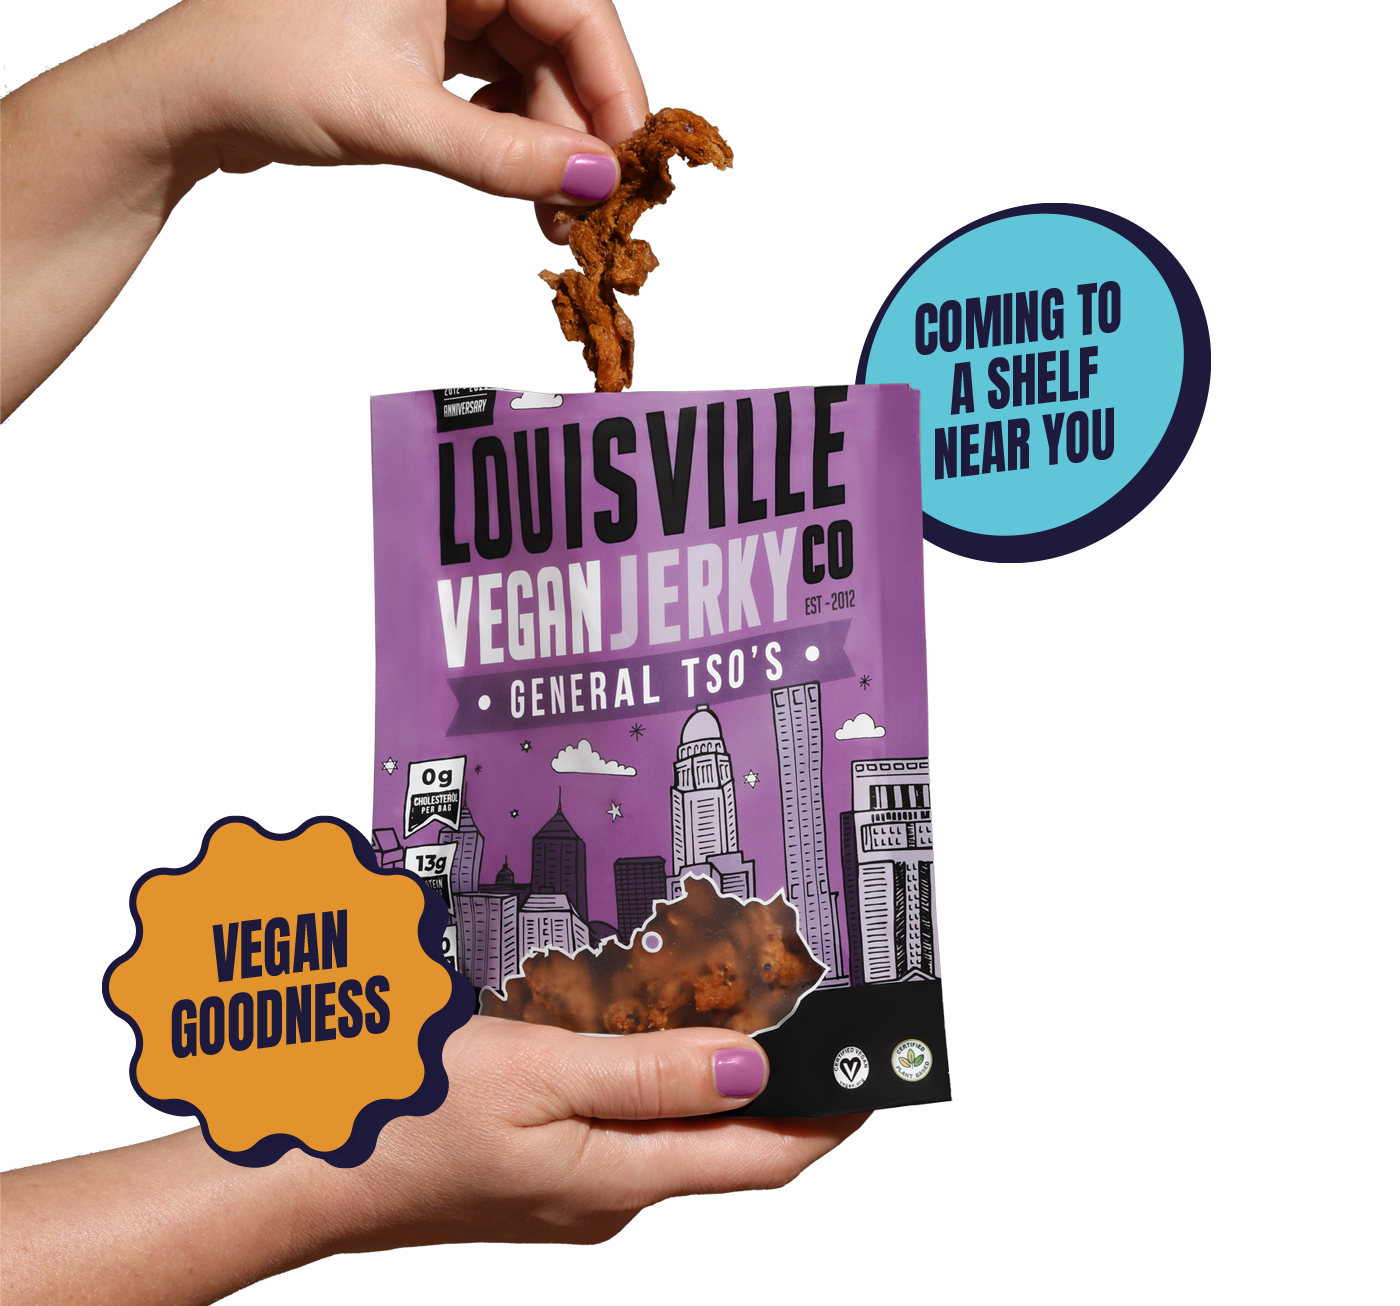 Person holding bag of General Tso's vegan jerky. Popups that say "Vegan Goodness" and "Coming to a shelf near you".